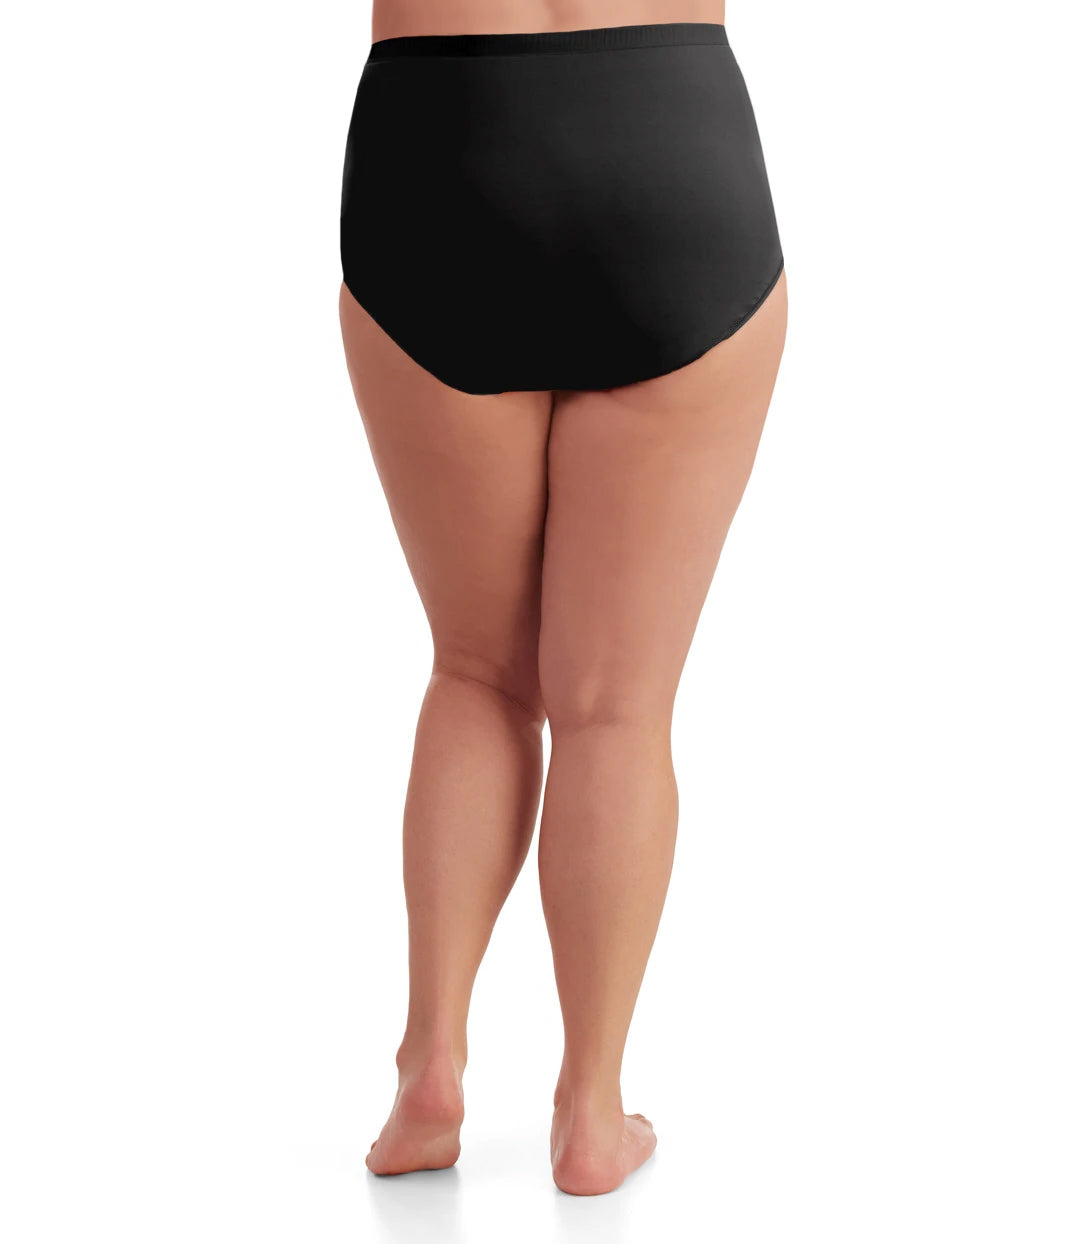 Bottom half of plus sized woman, back view, wearing JunoActive Junowear Hush Full Fit Briefs in black. This brief has a high waist fit with conservative leg opening.